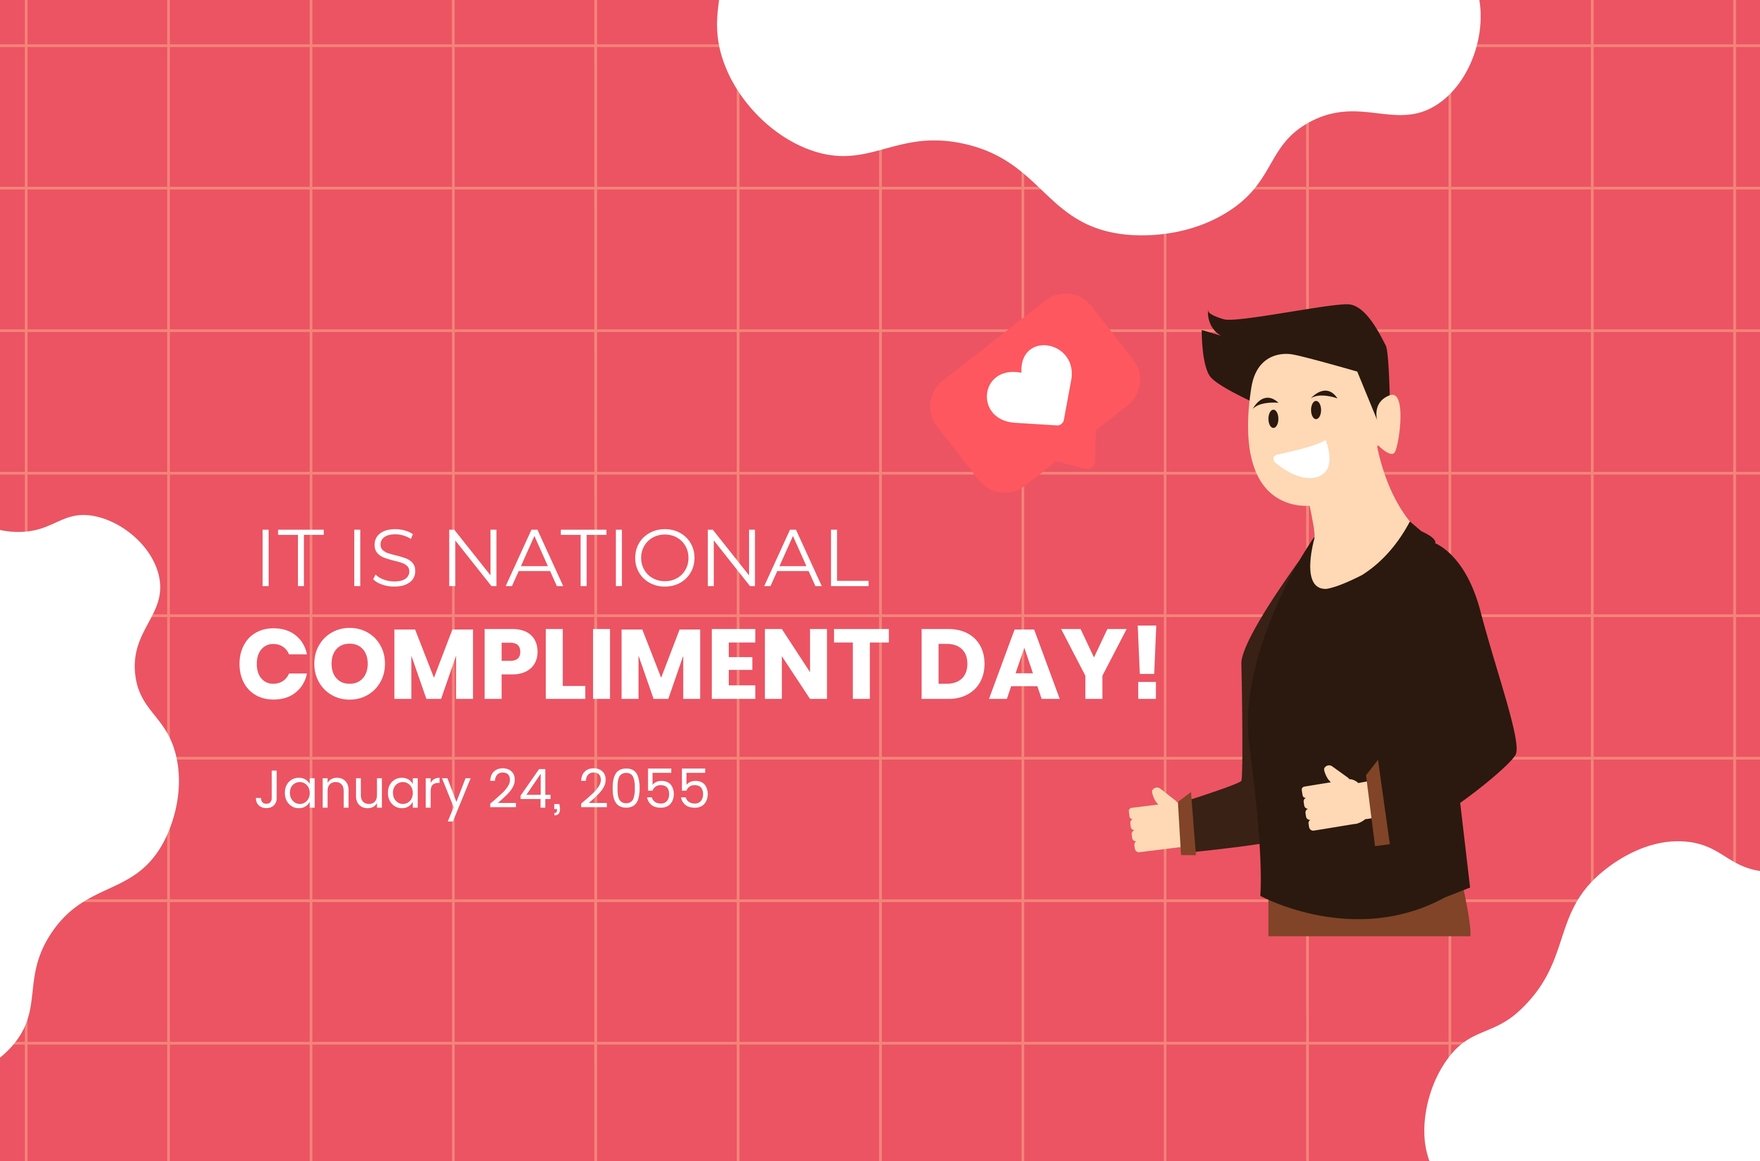 national compliment day banner